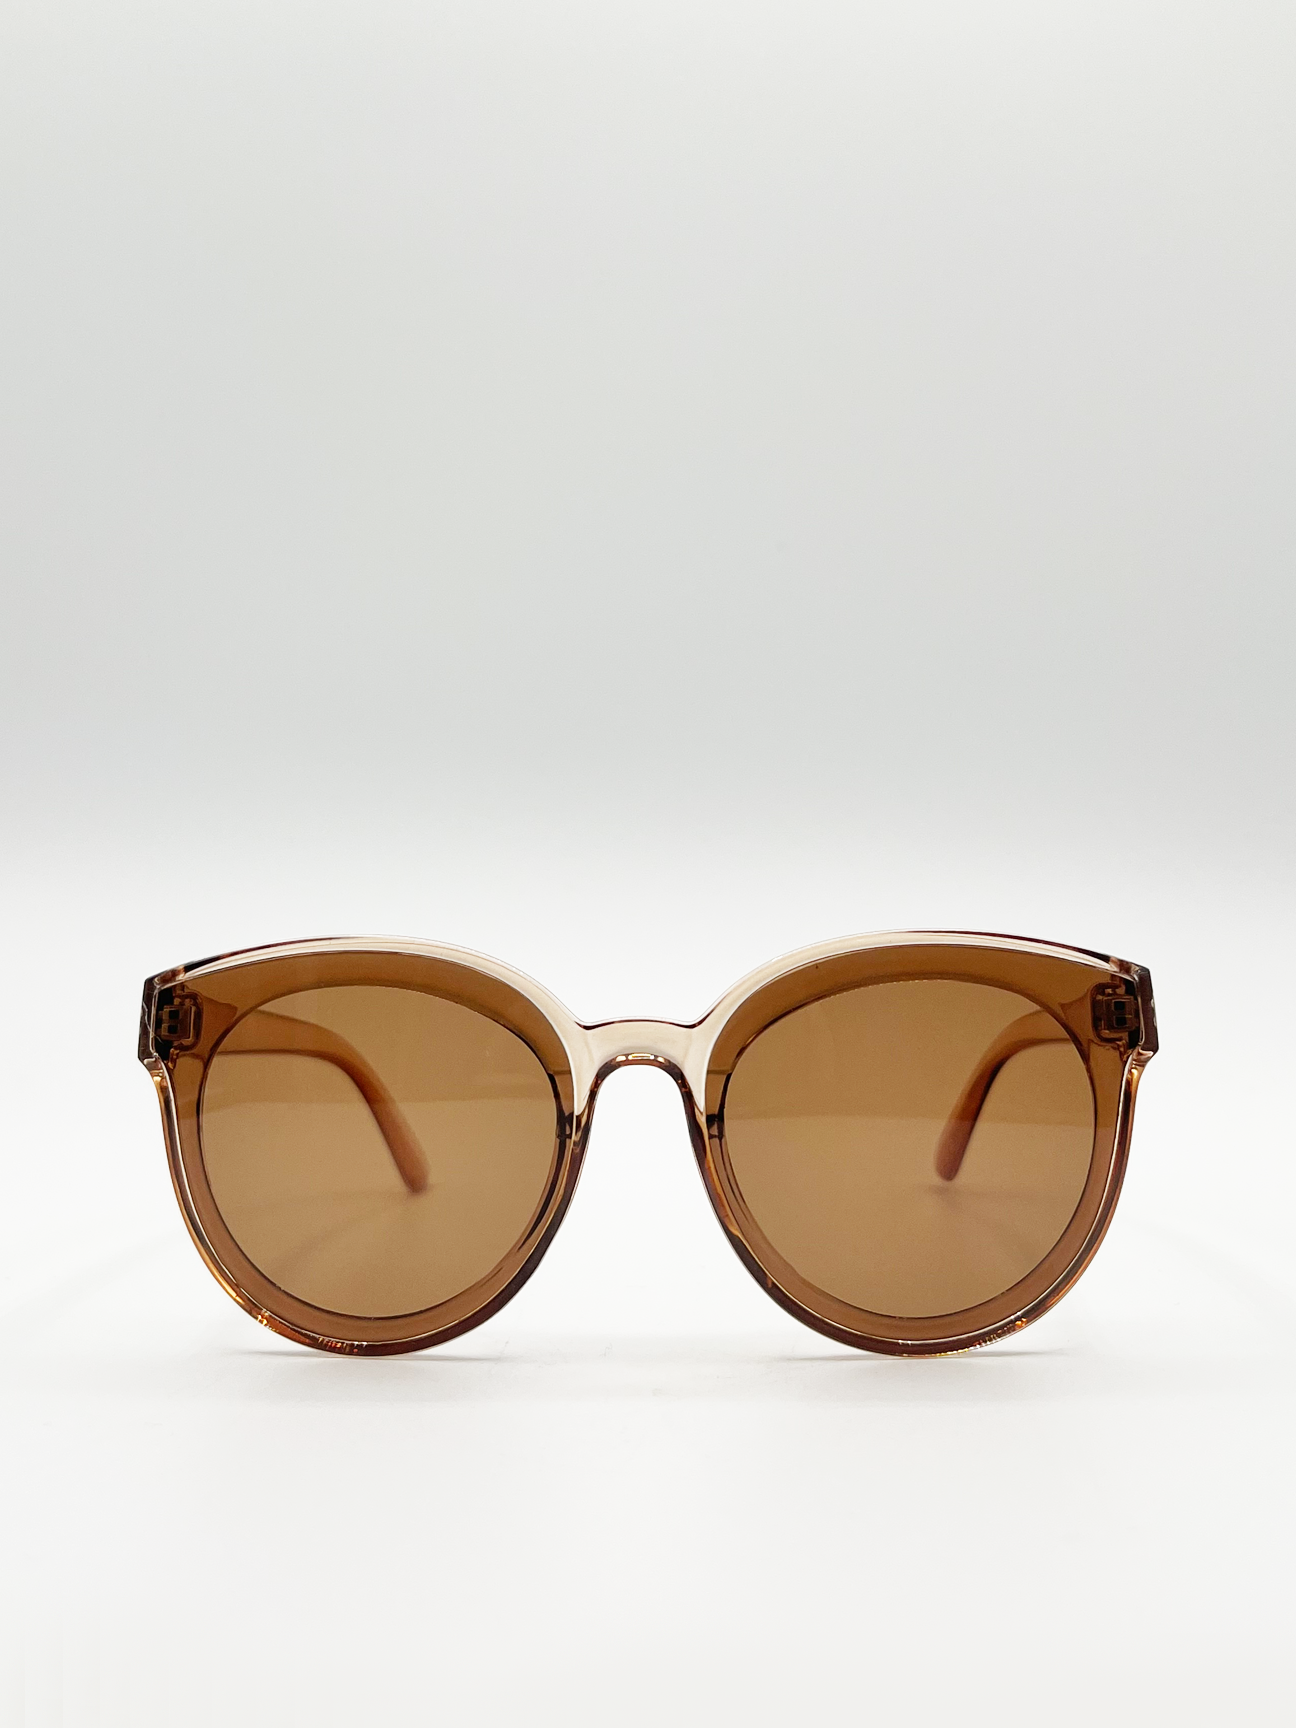 Sand Clear Frame Round Wayfarer Style Oversized Sunglasses with Brown Lenses